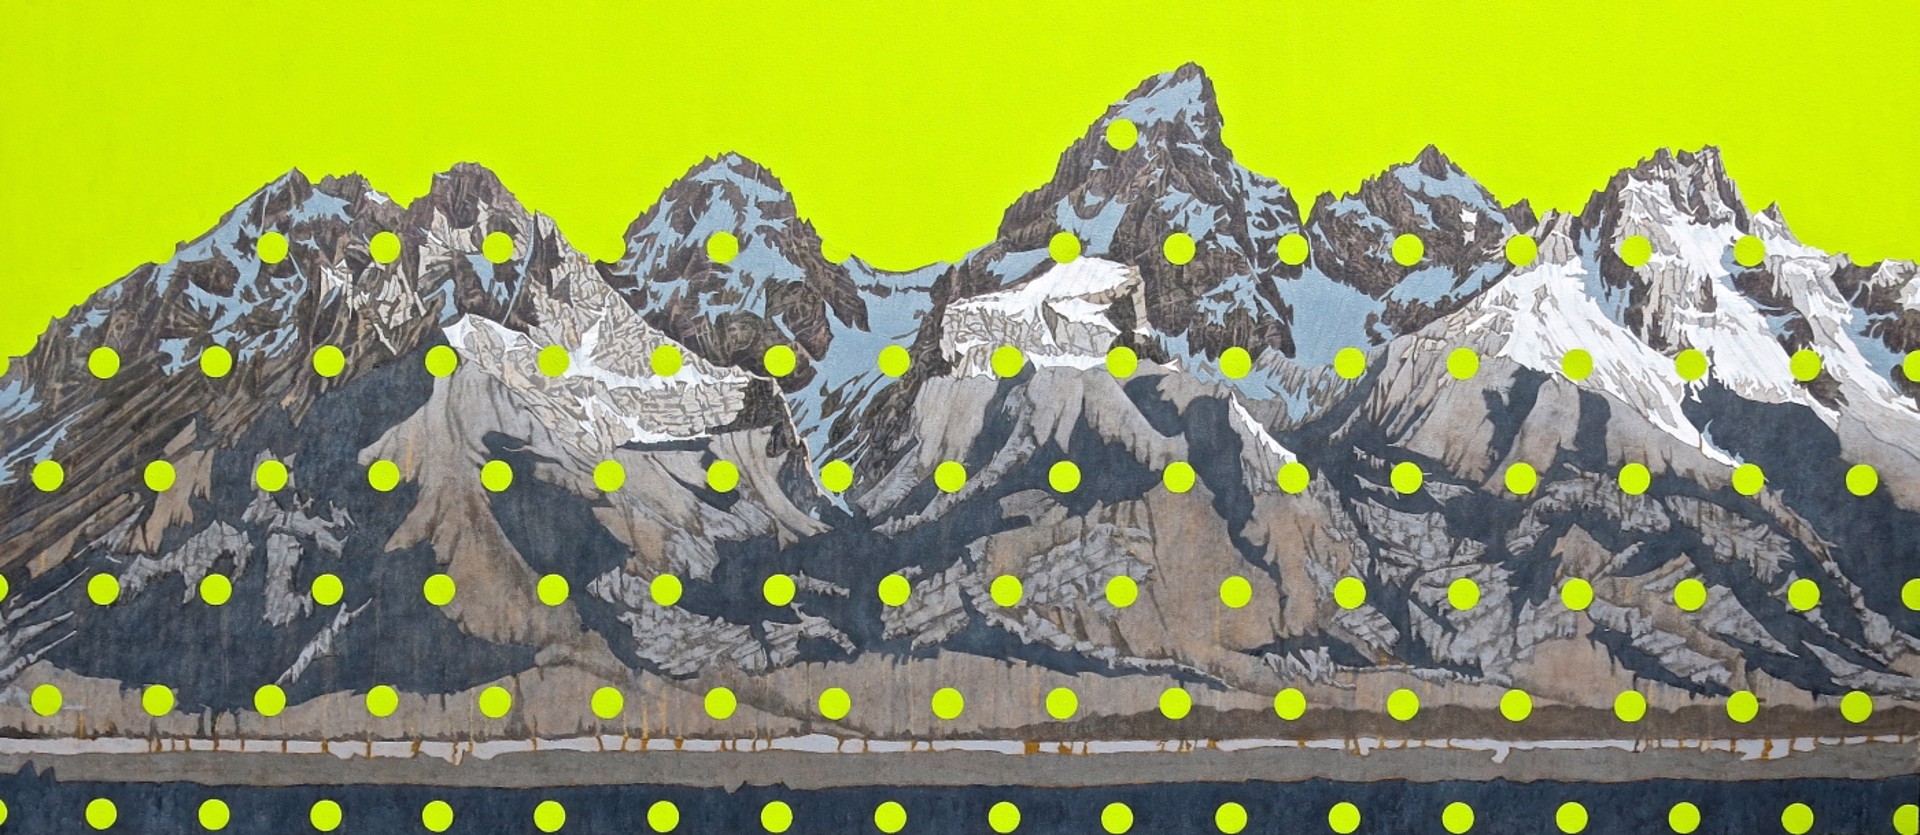 The Tetons - Fritz Commission by David Pirrie